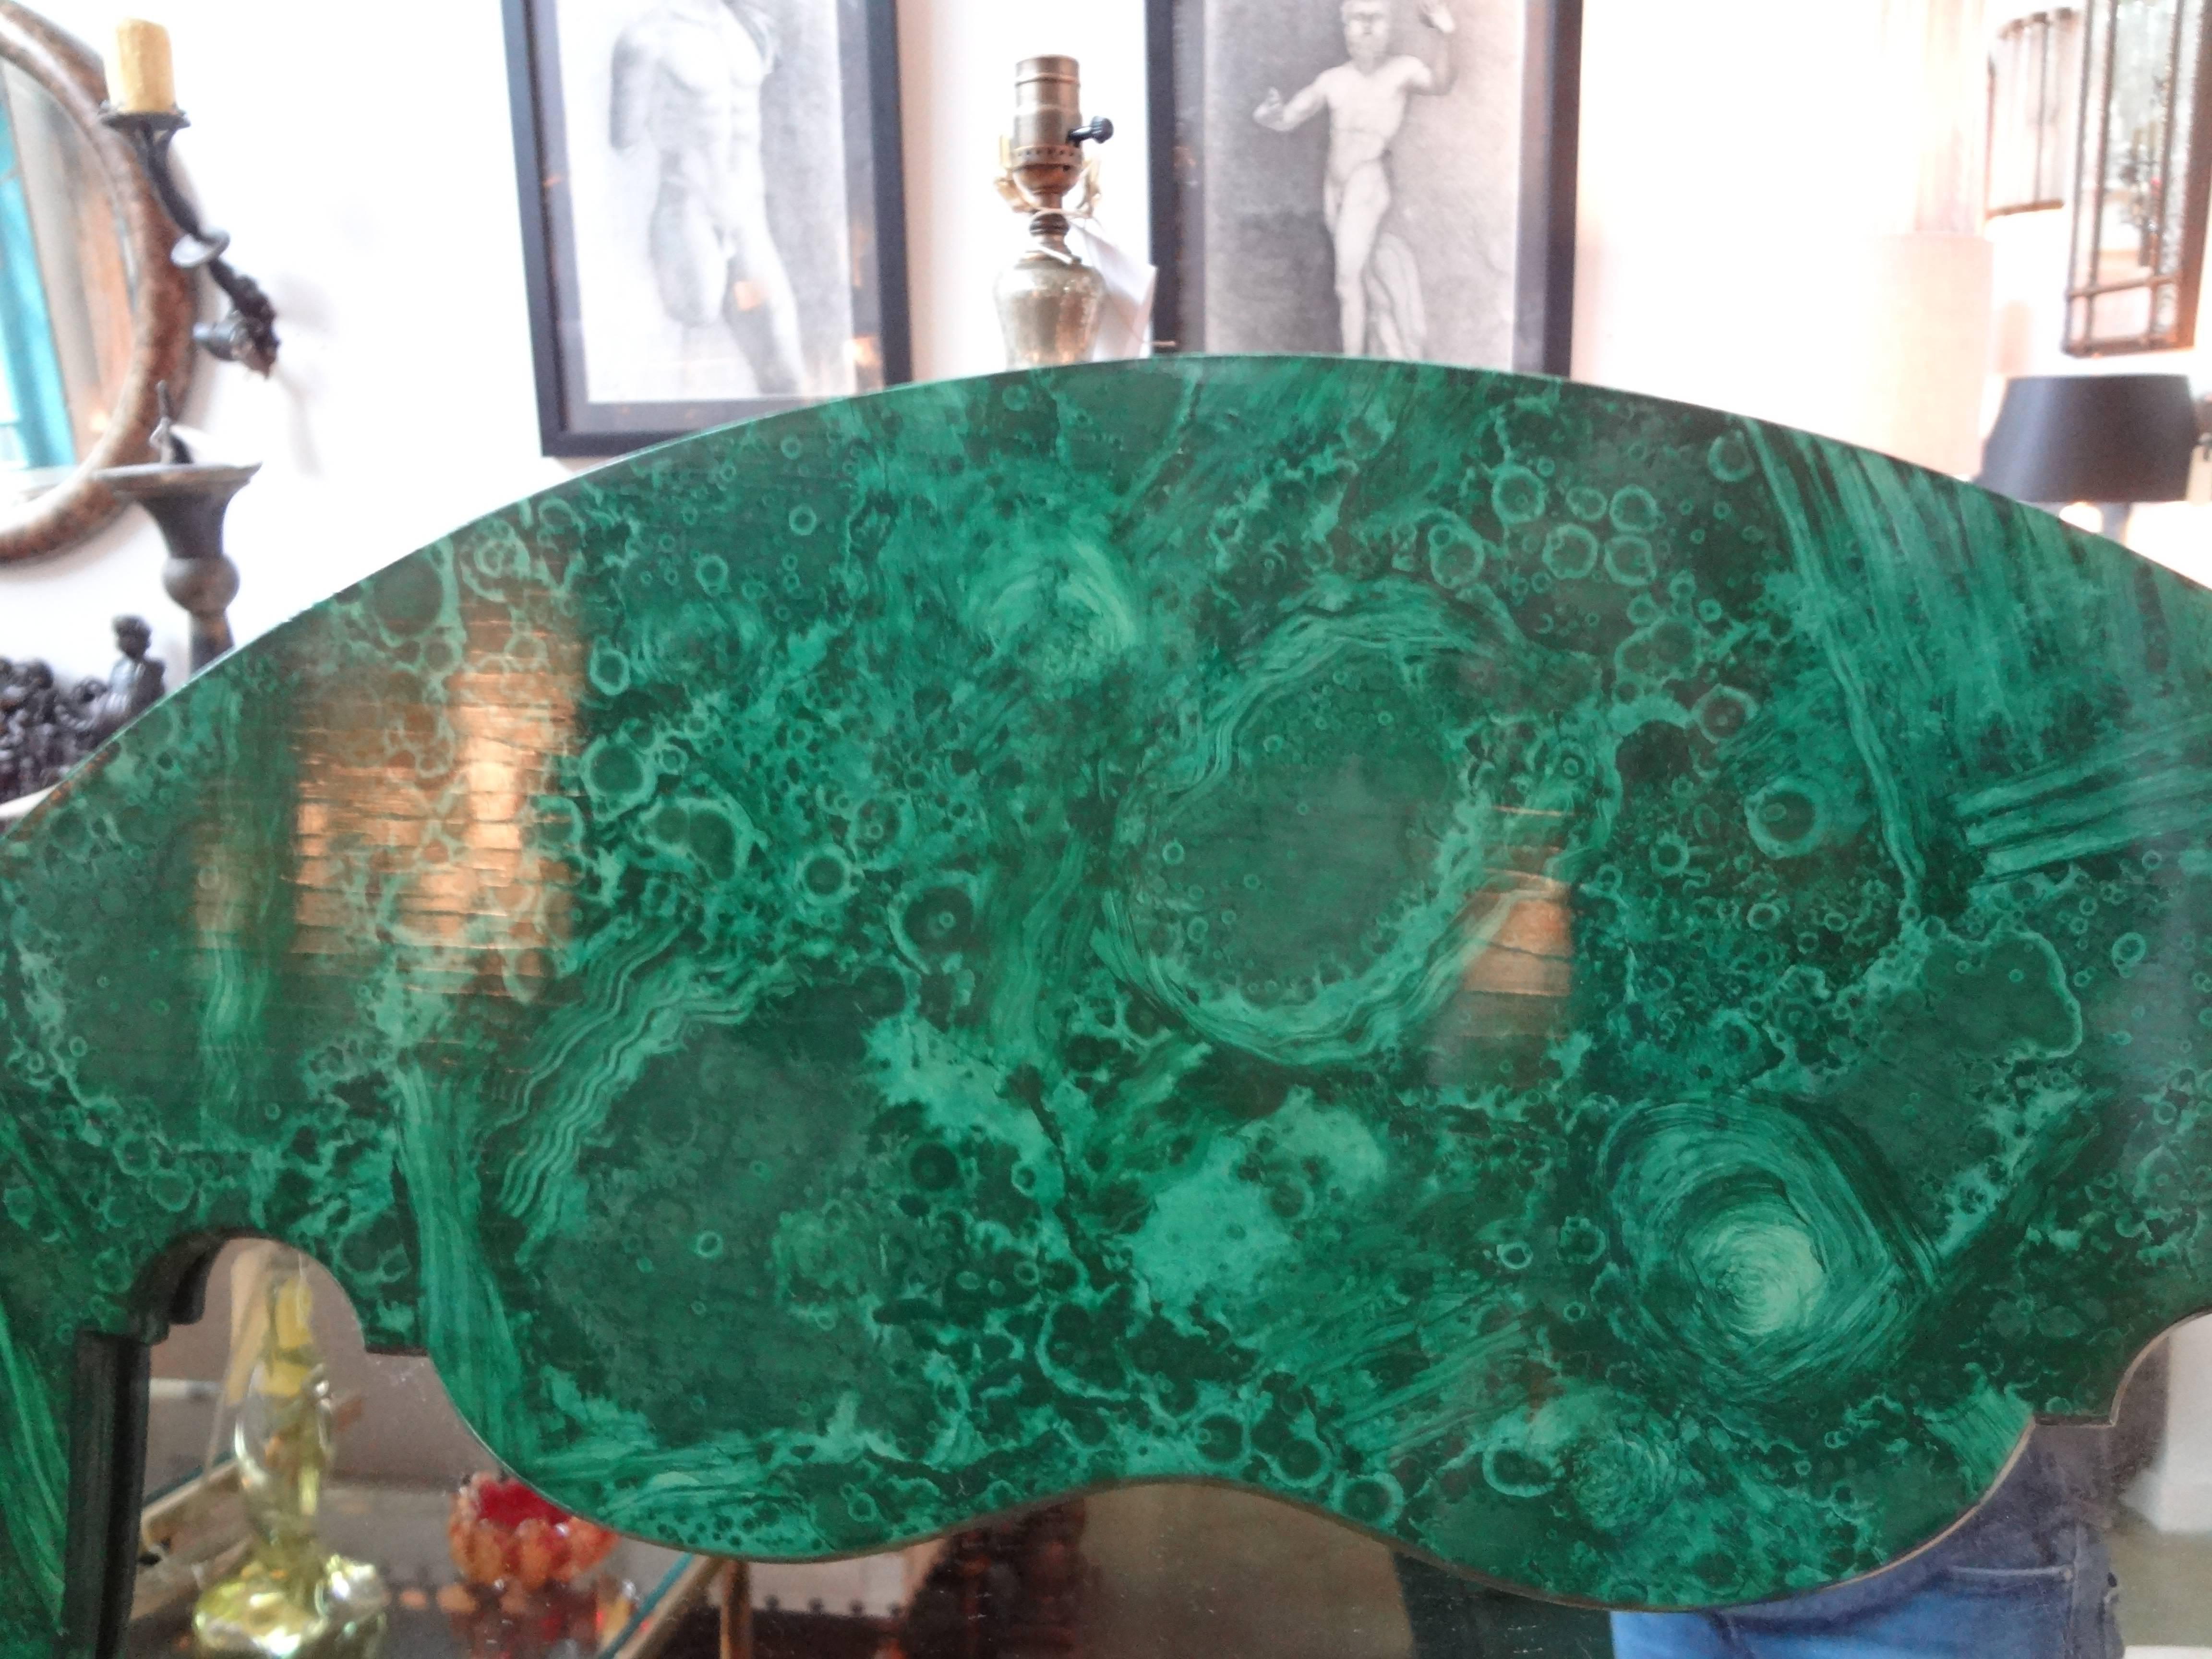 Stunning Italian Hollywood Regency faux malachite lacquered wood mirror.
This vintage Italian mirror with its hand decorated faux malachite finish is very realistic looking and dates to the 1960s.

 